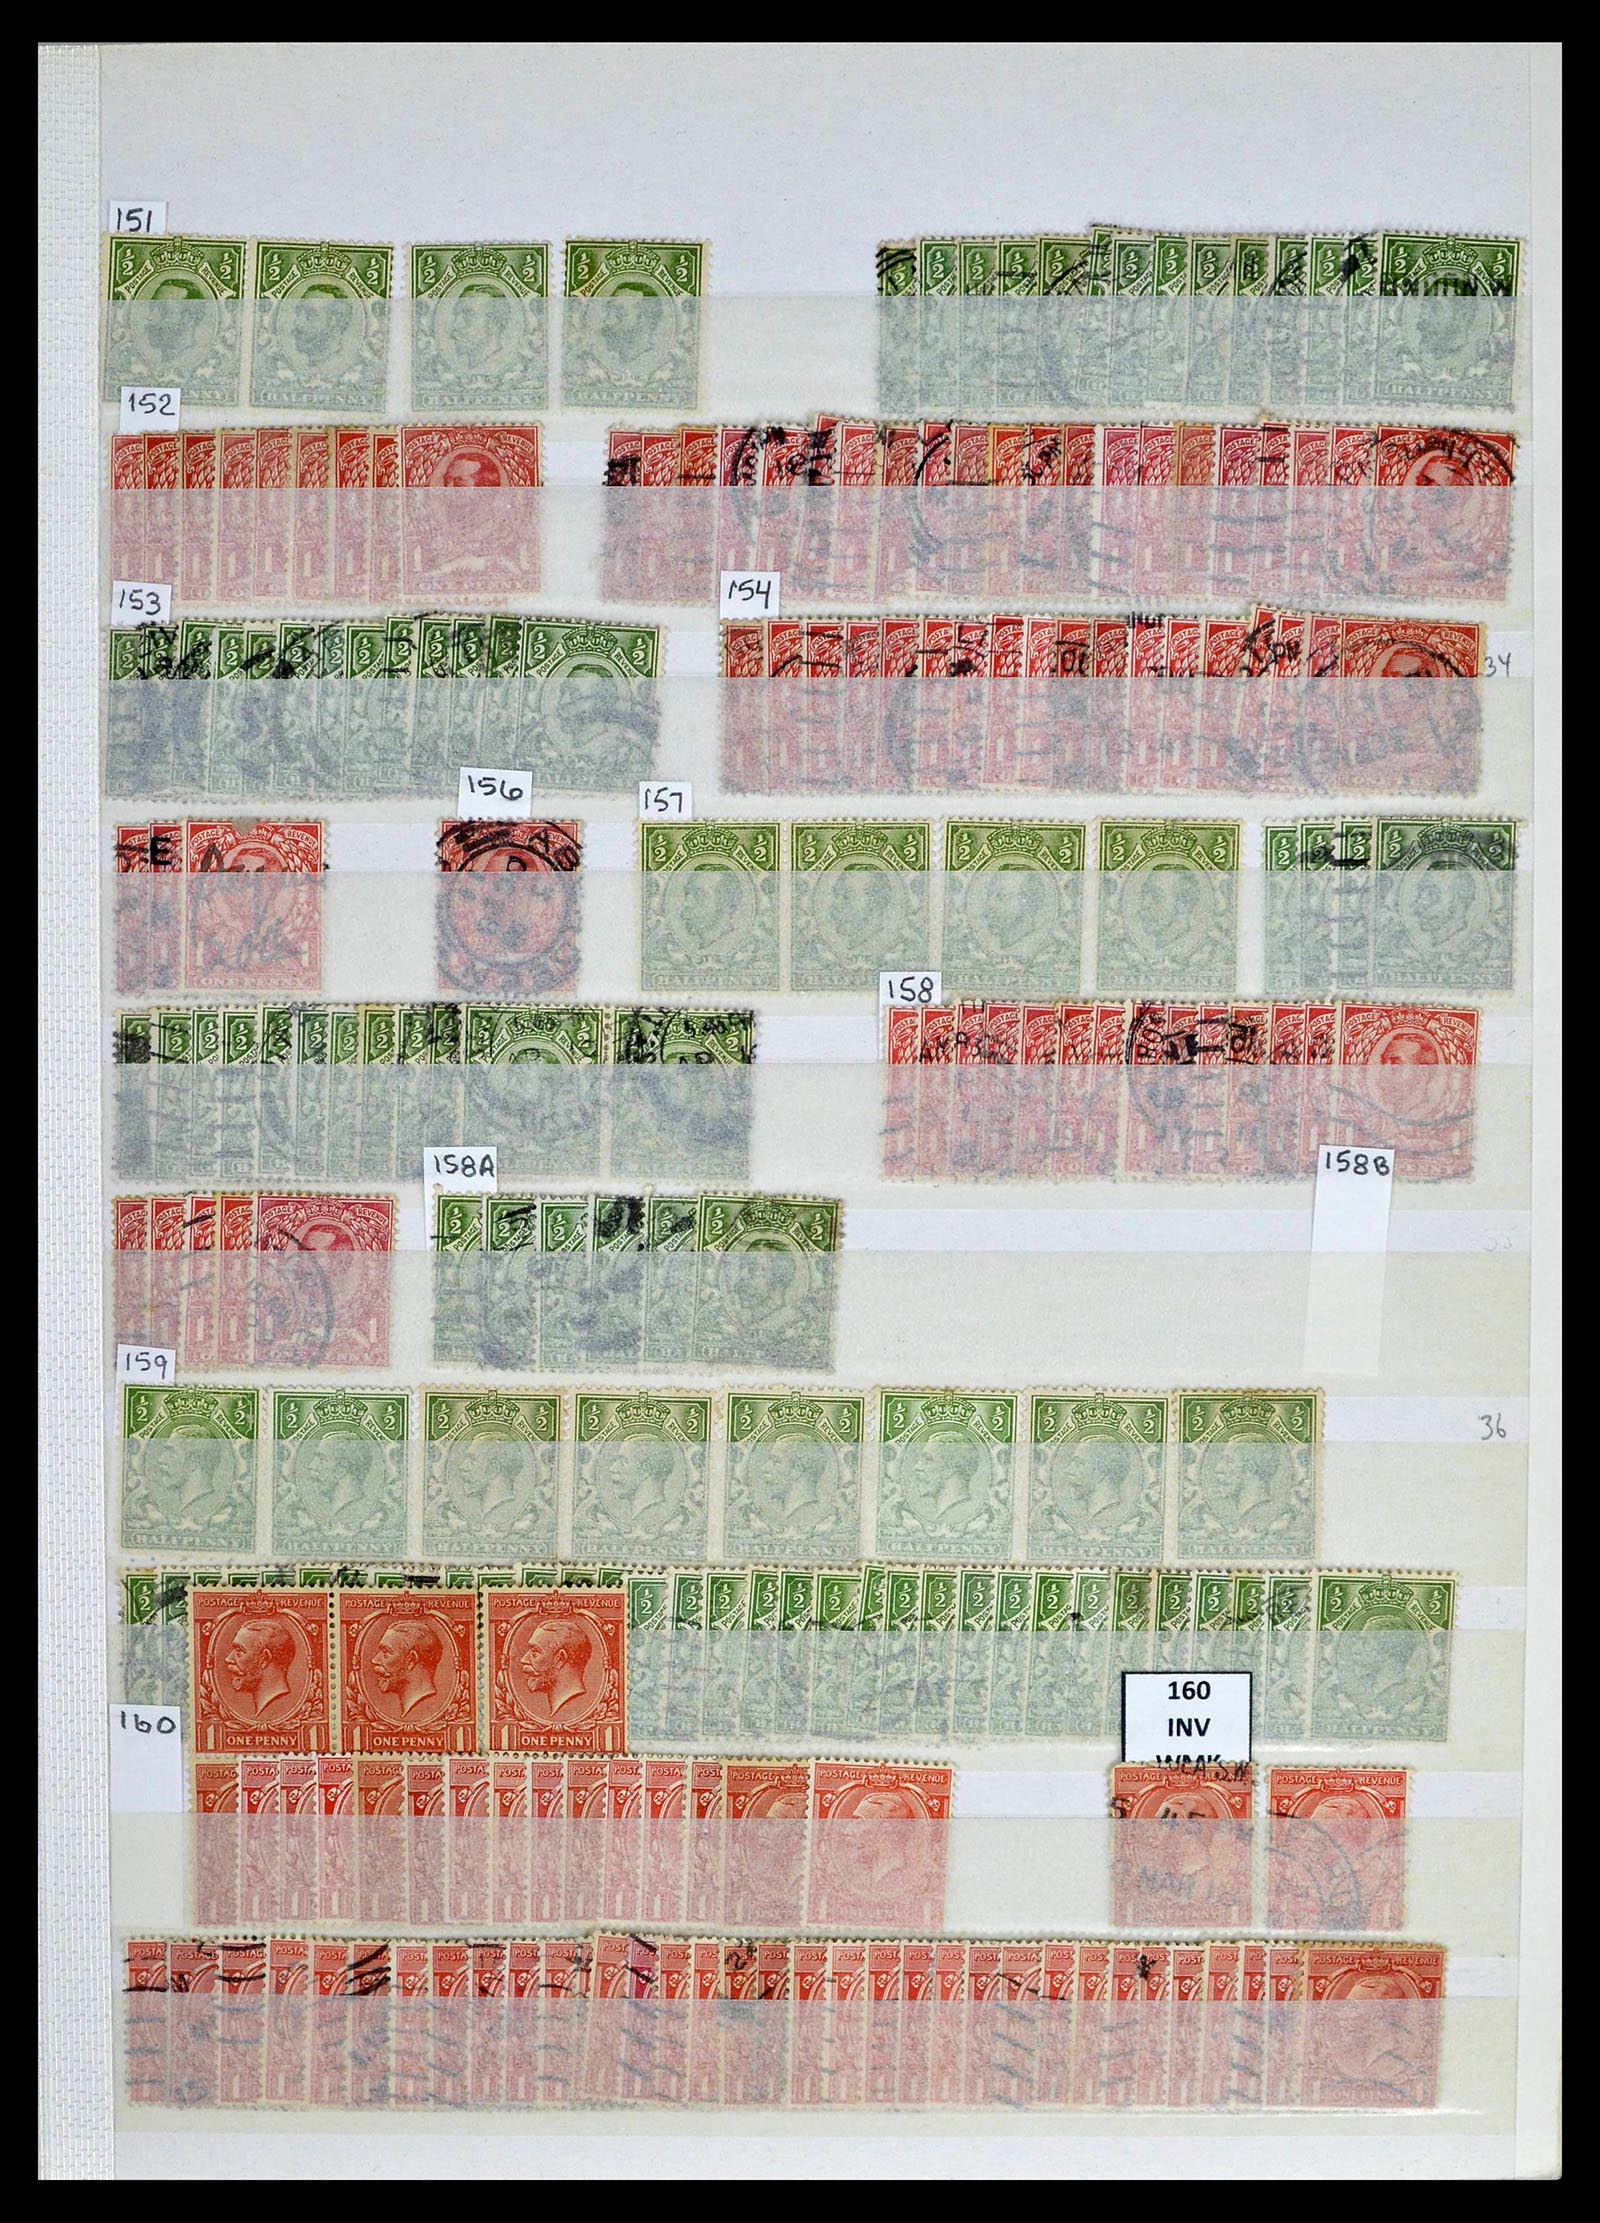 39196 0022 - Stamp collection 39196 Great Britain 1844-1955.